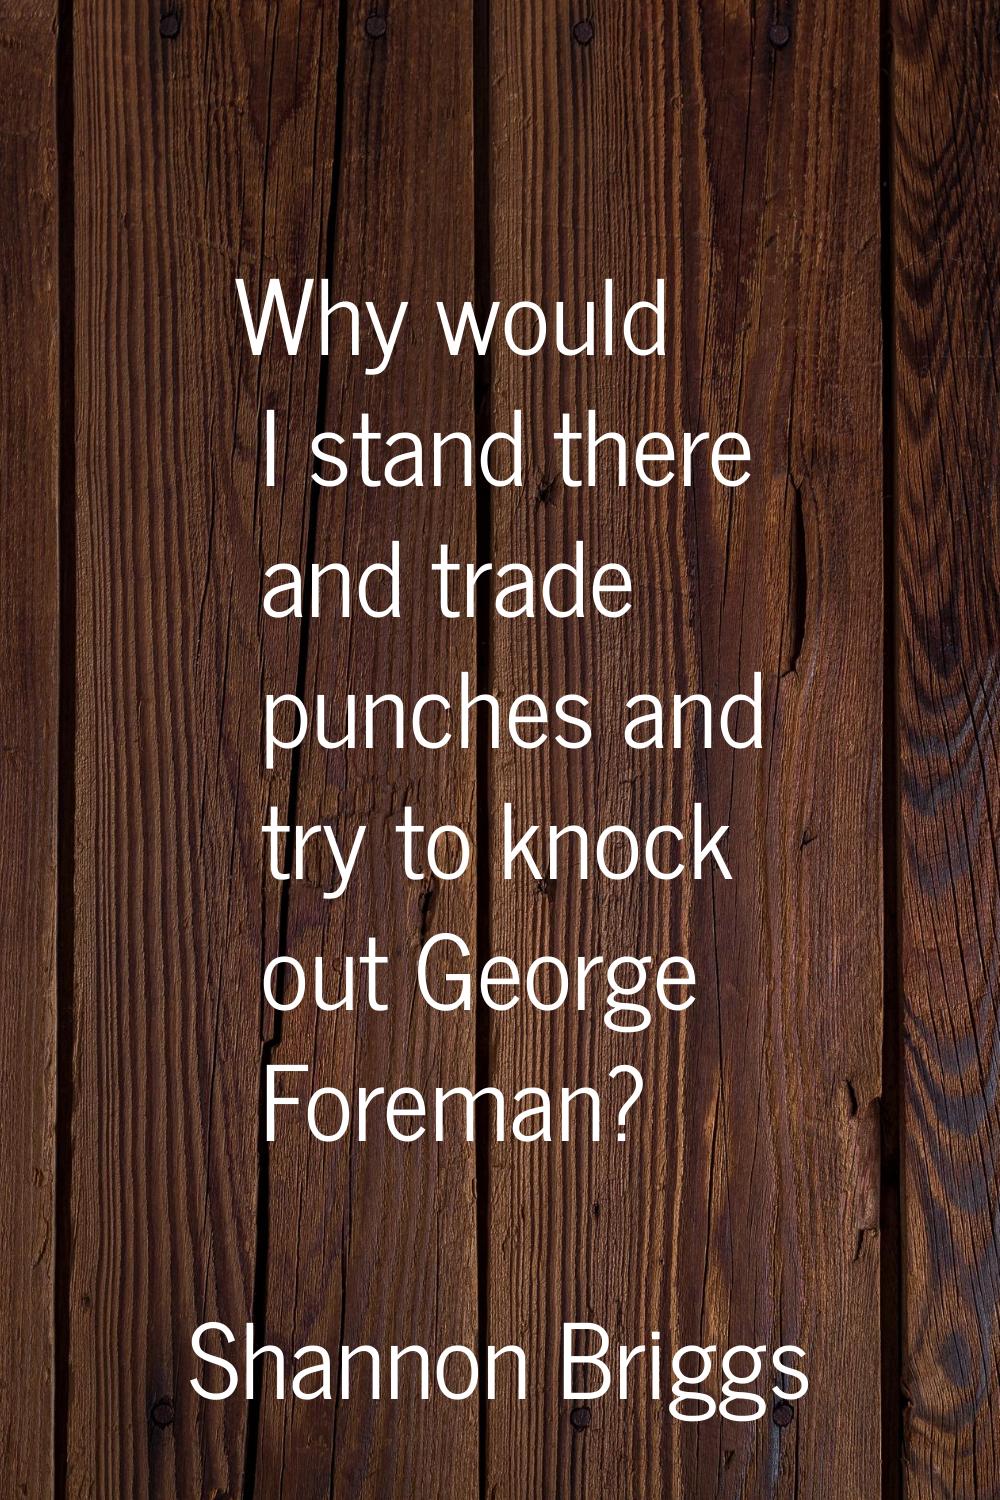 Why would I stand there and trade punches and try to knock out George Foreman?